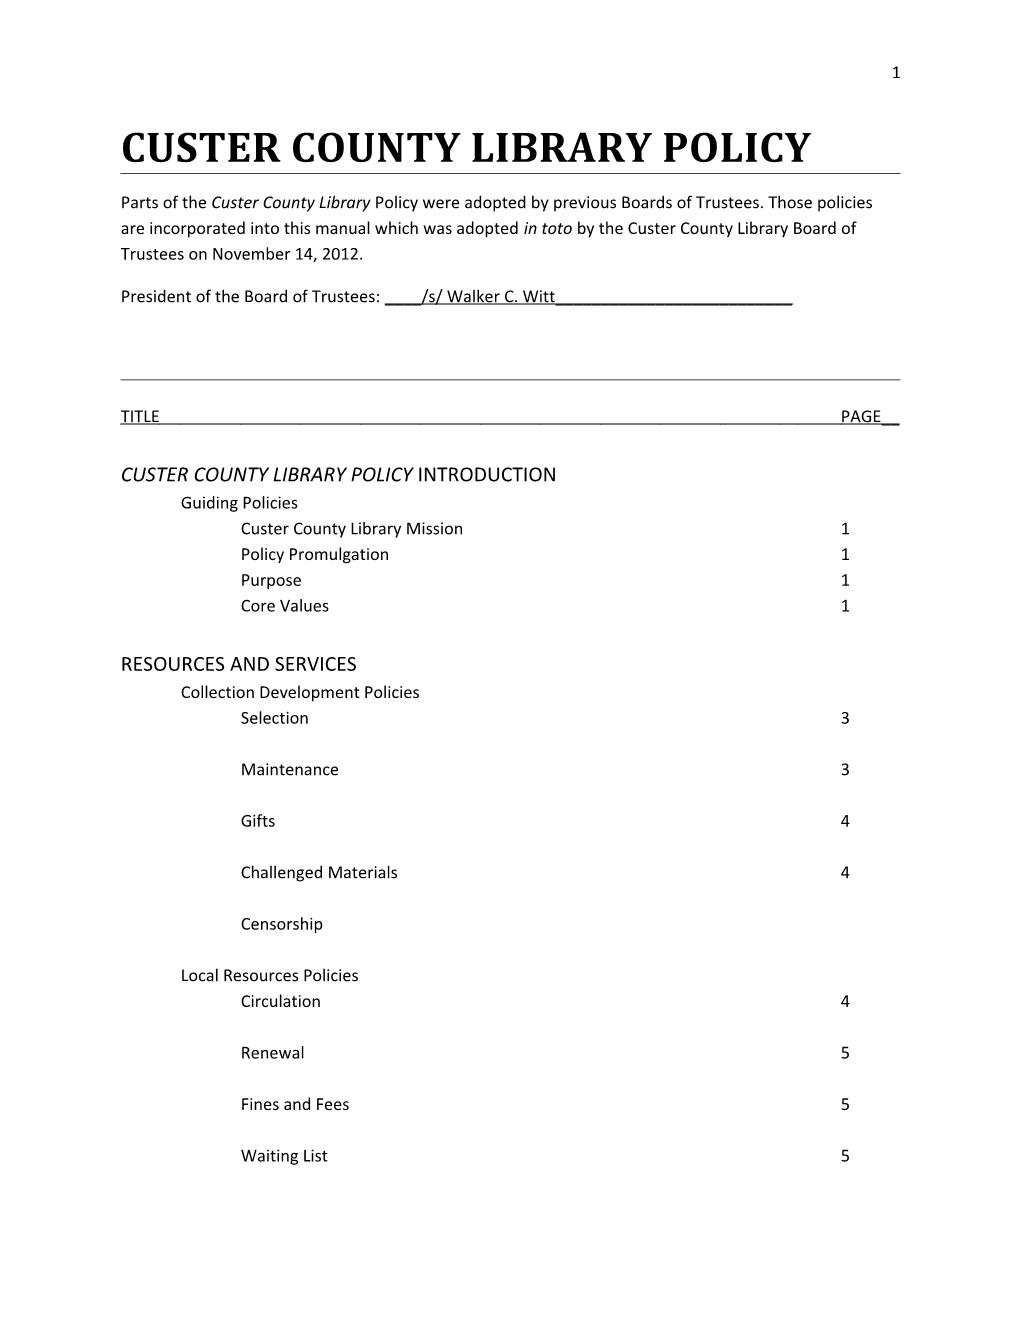 Custer County Library Policy s1